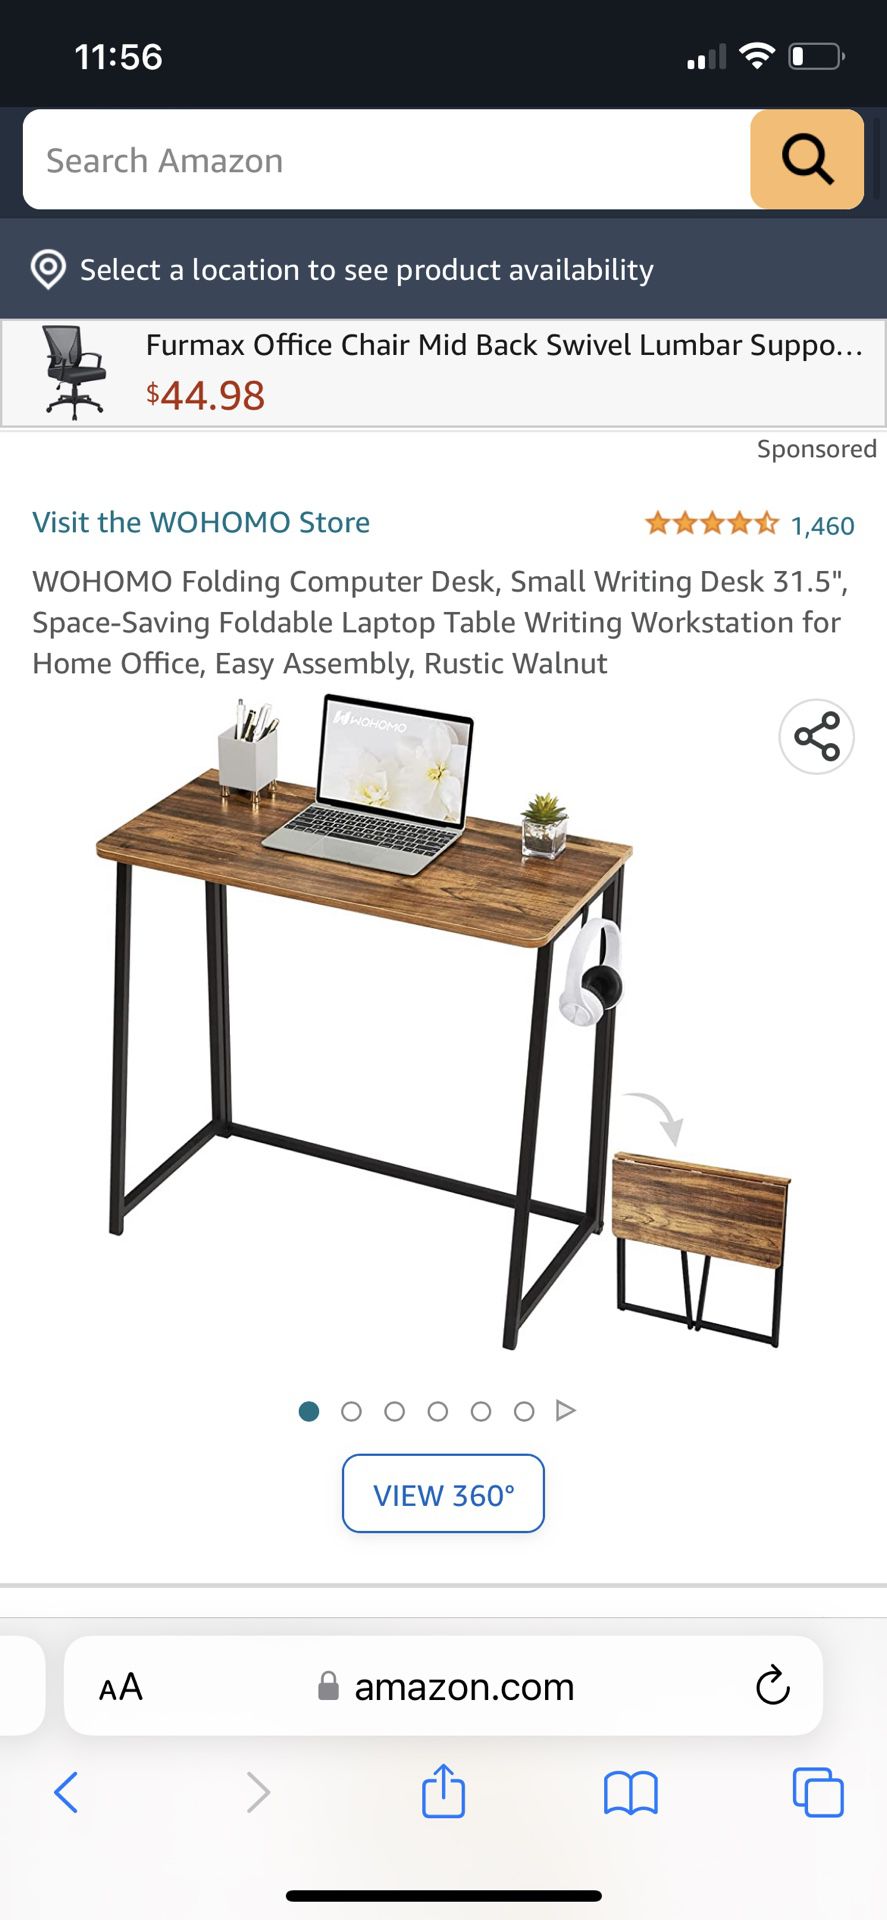 WOHOMO Folding Computer Desk, Small Writing Desk 31.5, Space-Saving  Foldable Laptop Table Writing Workstation for Home Office, Easy Assembly,  Rustic